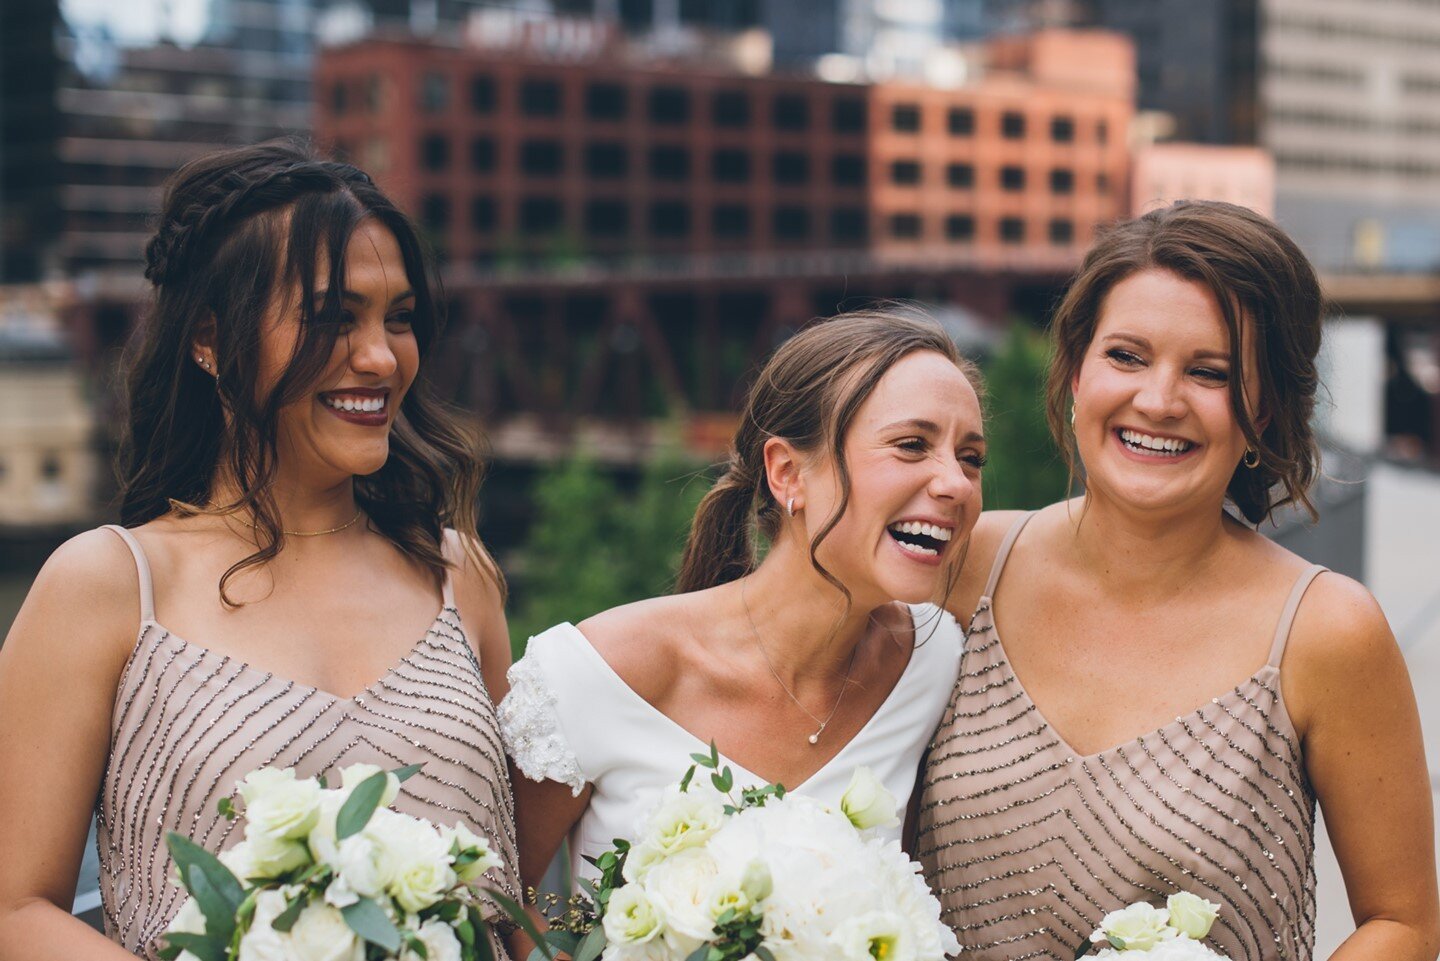 Your bridal party needs to be making you bust up all day. Tip: find your funniest friends and get super close to them in preparation for this.